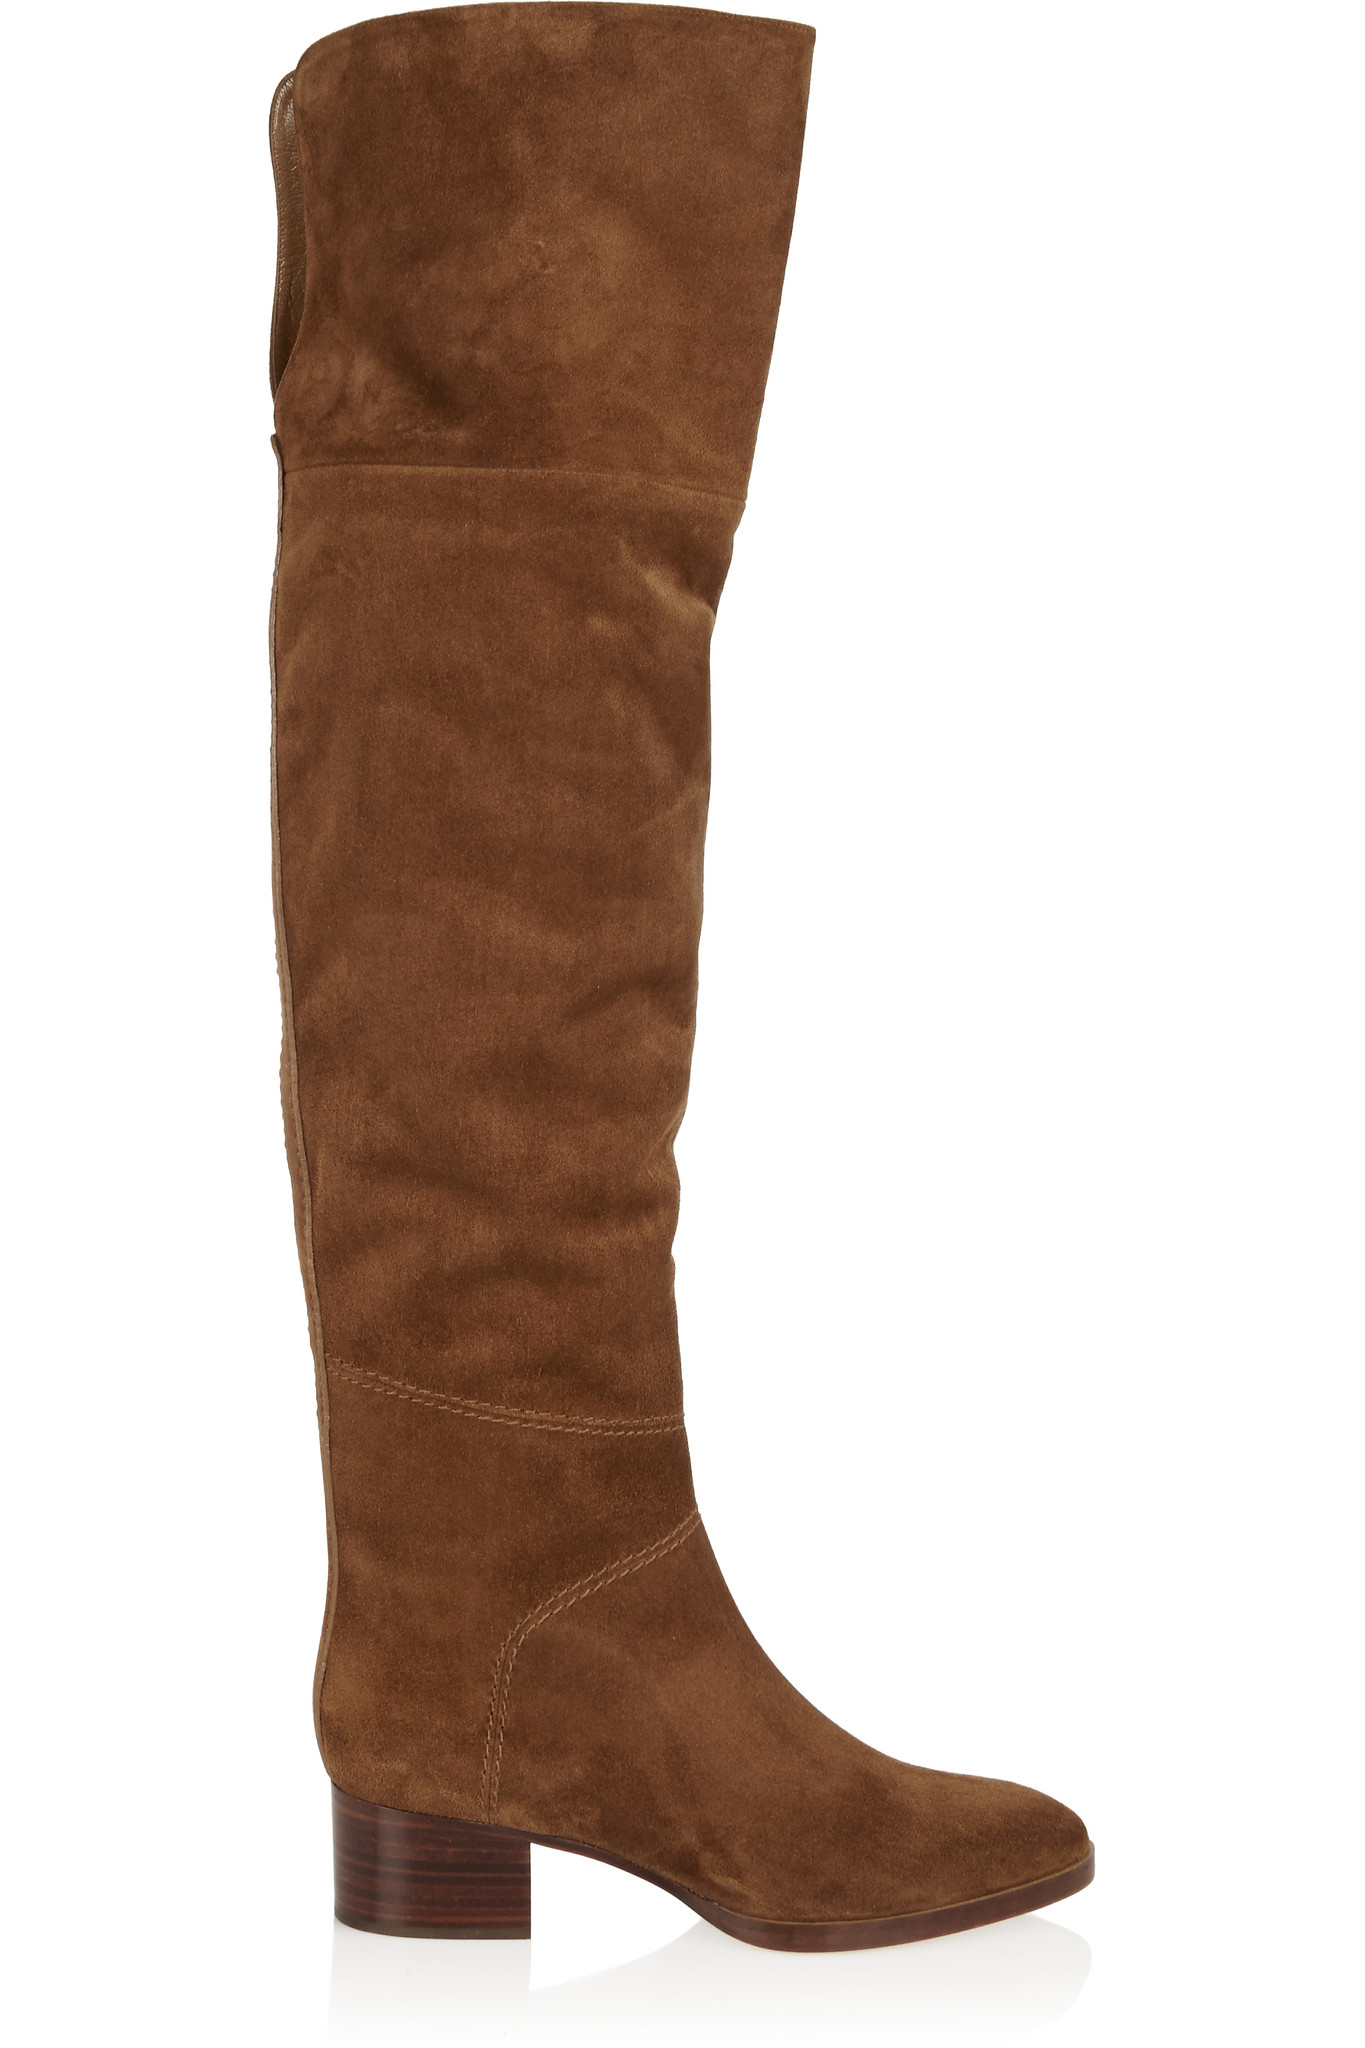 Chloé Suede Over-the-knee Boots in Brown | Lyst